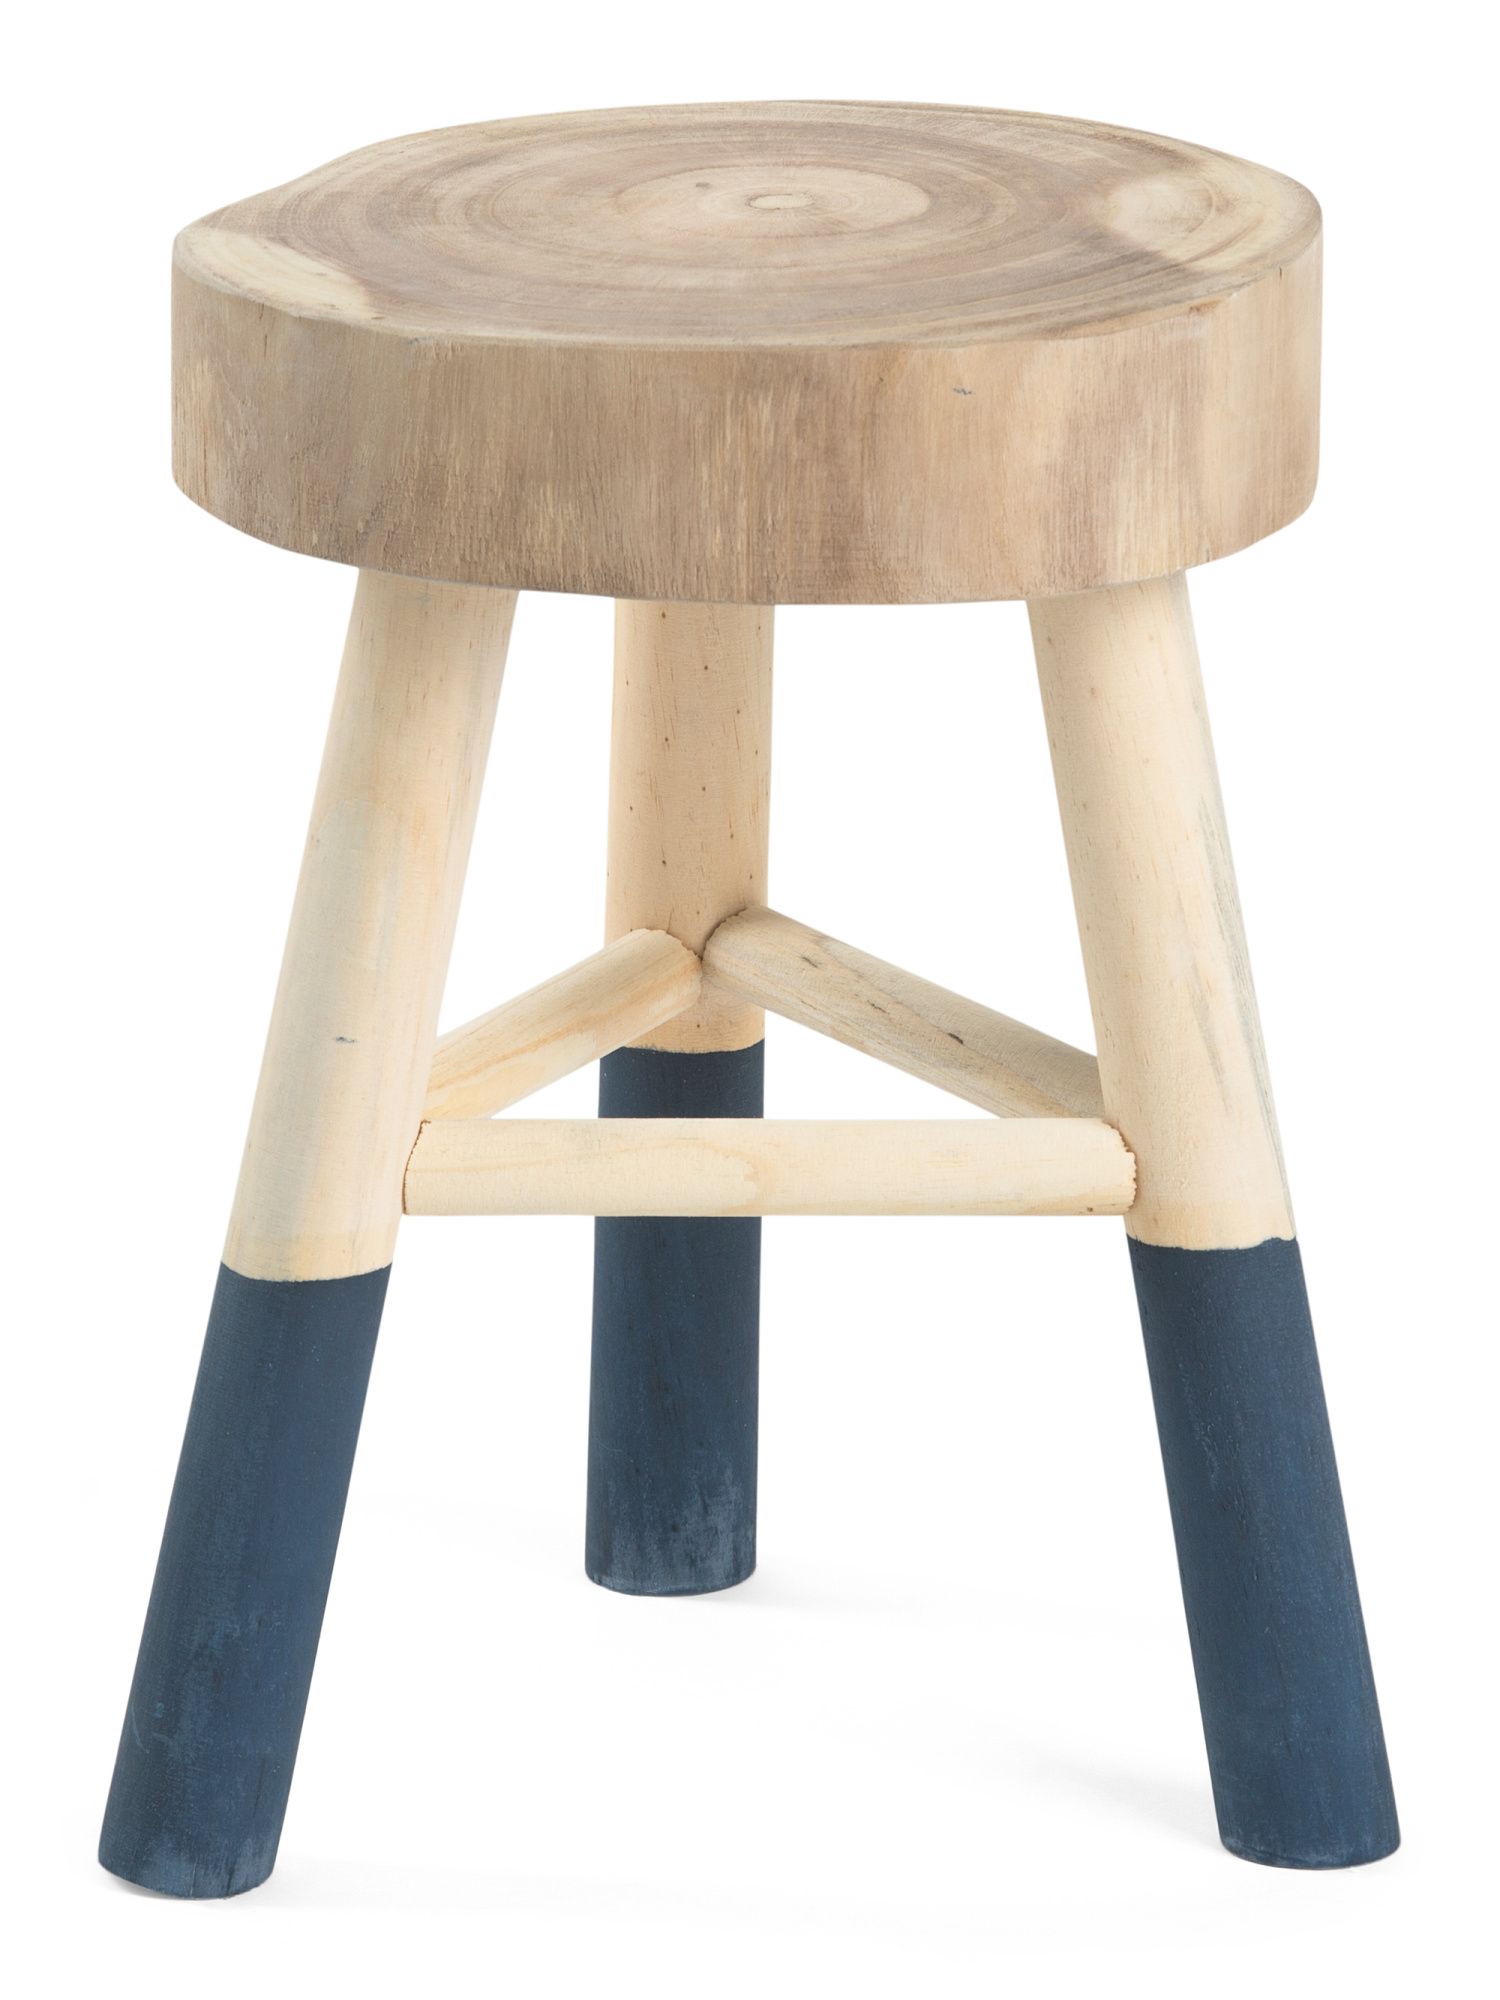 18in Wooden Stool With Dipped Legs | Marshalls